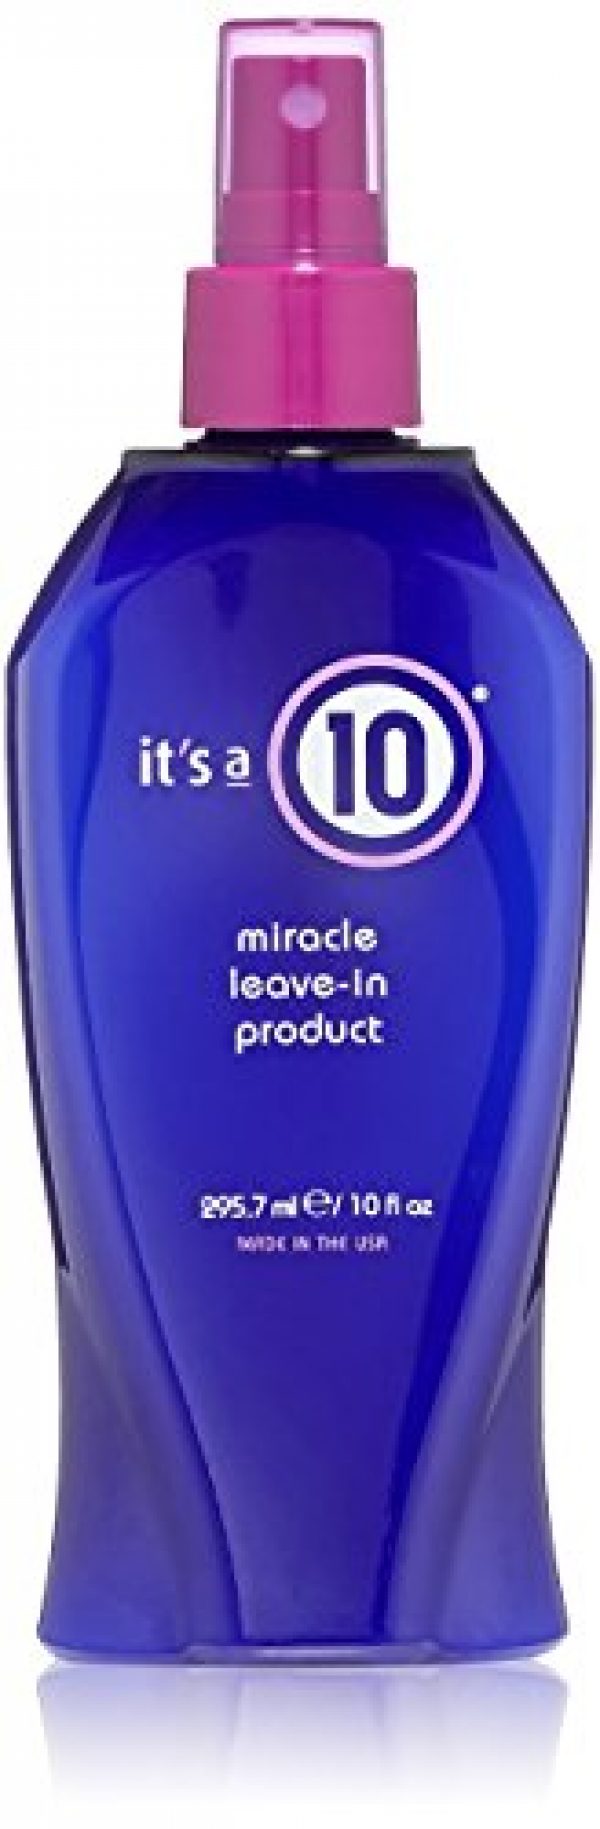 It's A 10 Haircare Miracle Leave-In Conditioner Spray - 10 oz. - 1ct 14